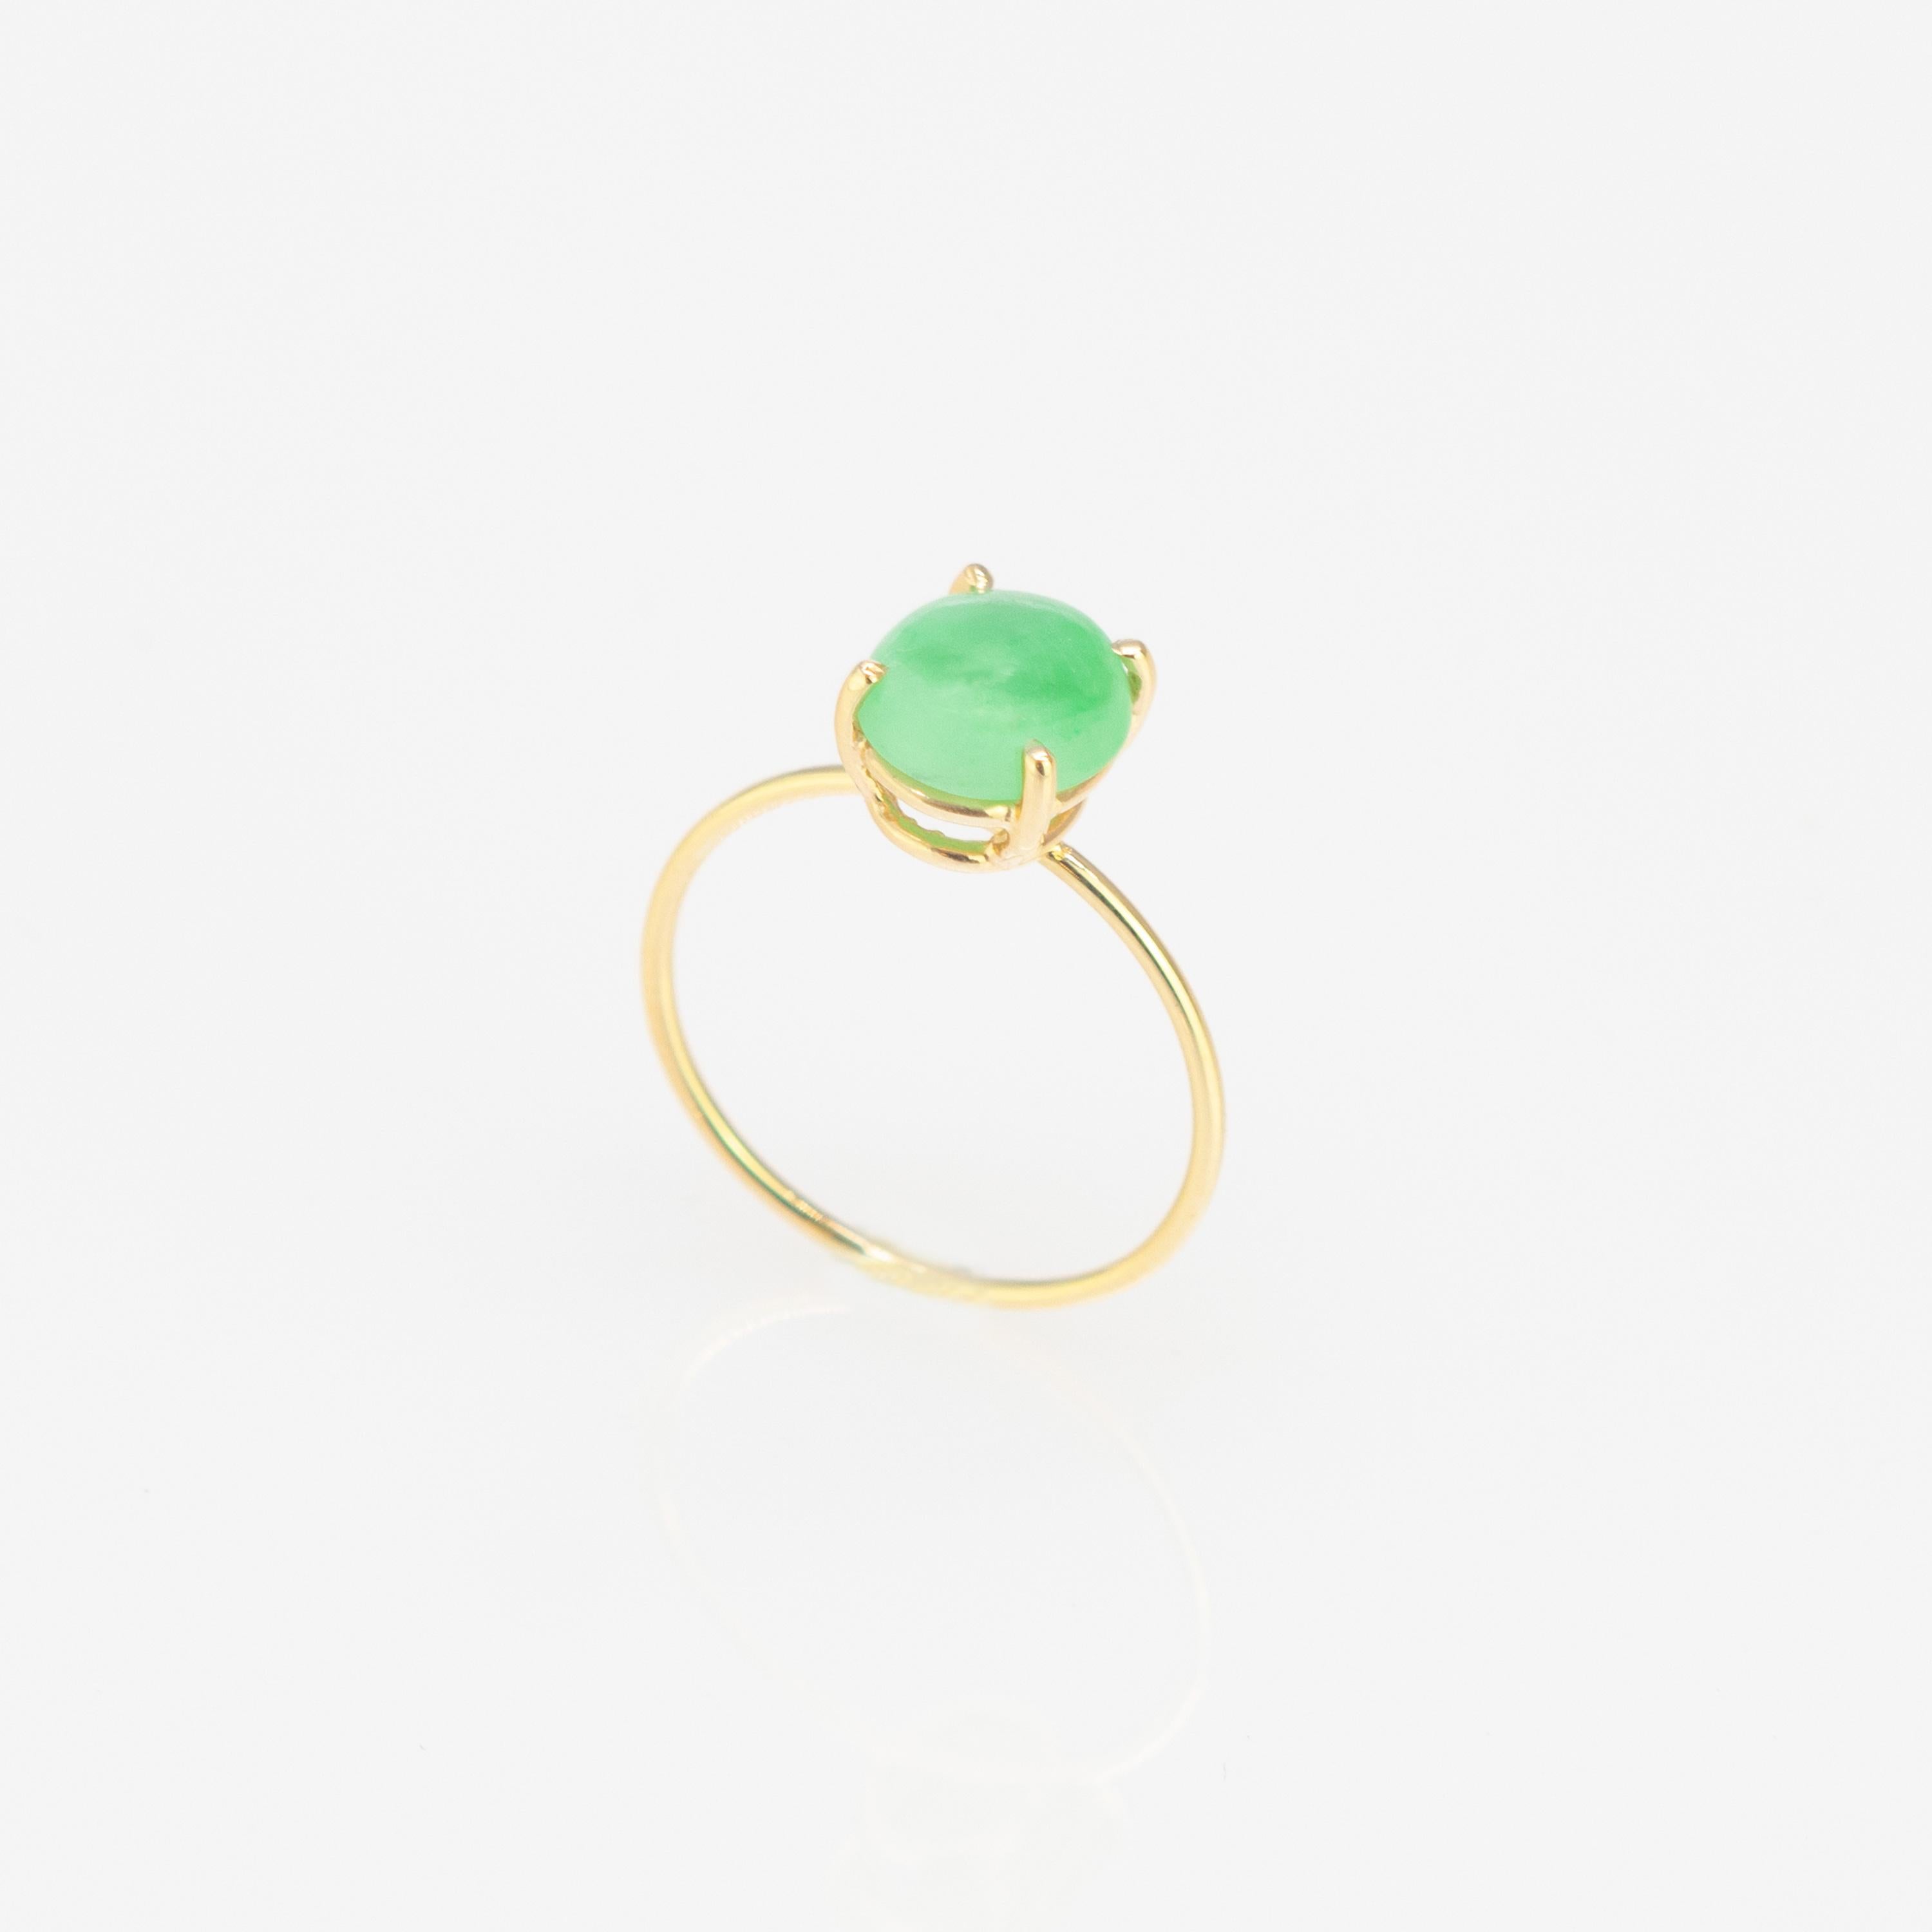 Oval cabochon cut solitaire ring design. 1.2 carats natural jade on 18 karat yellow gold ring inspired by the joy of summer sunsets. With a perfect size, it will fill with your daily elegant outfits.

This jewellery piece is inspired by its